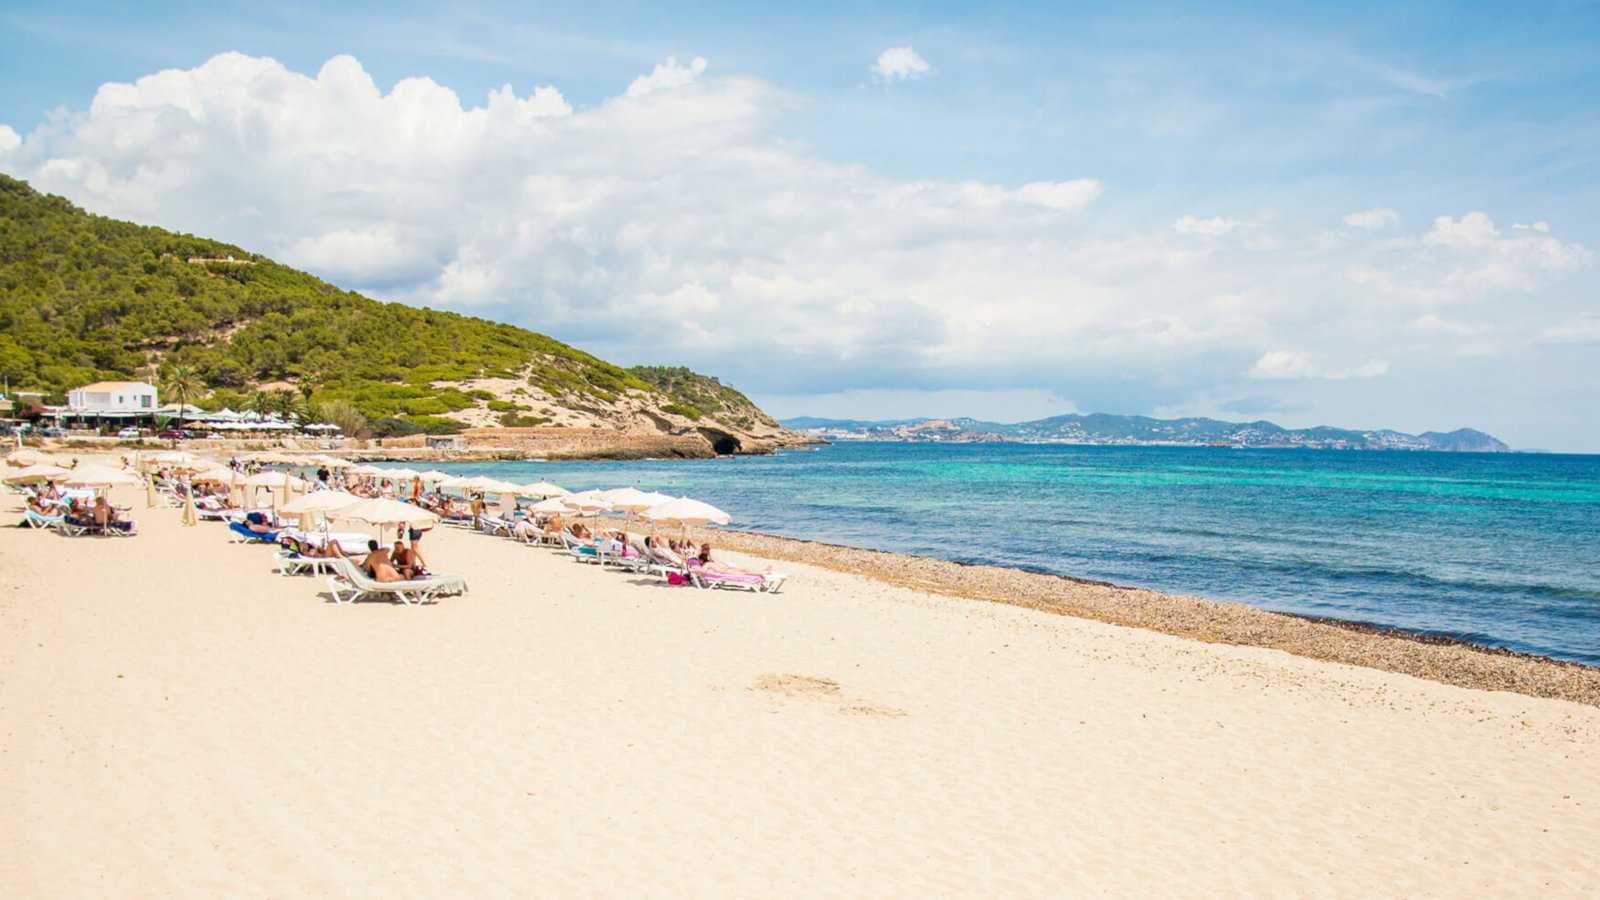 A pristine beach in Ibiza on a sunny day with men on beach lounges in the middle distance.